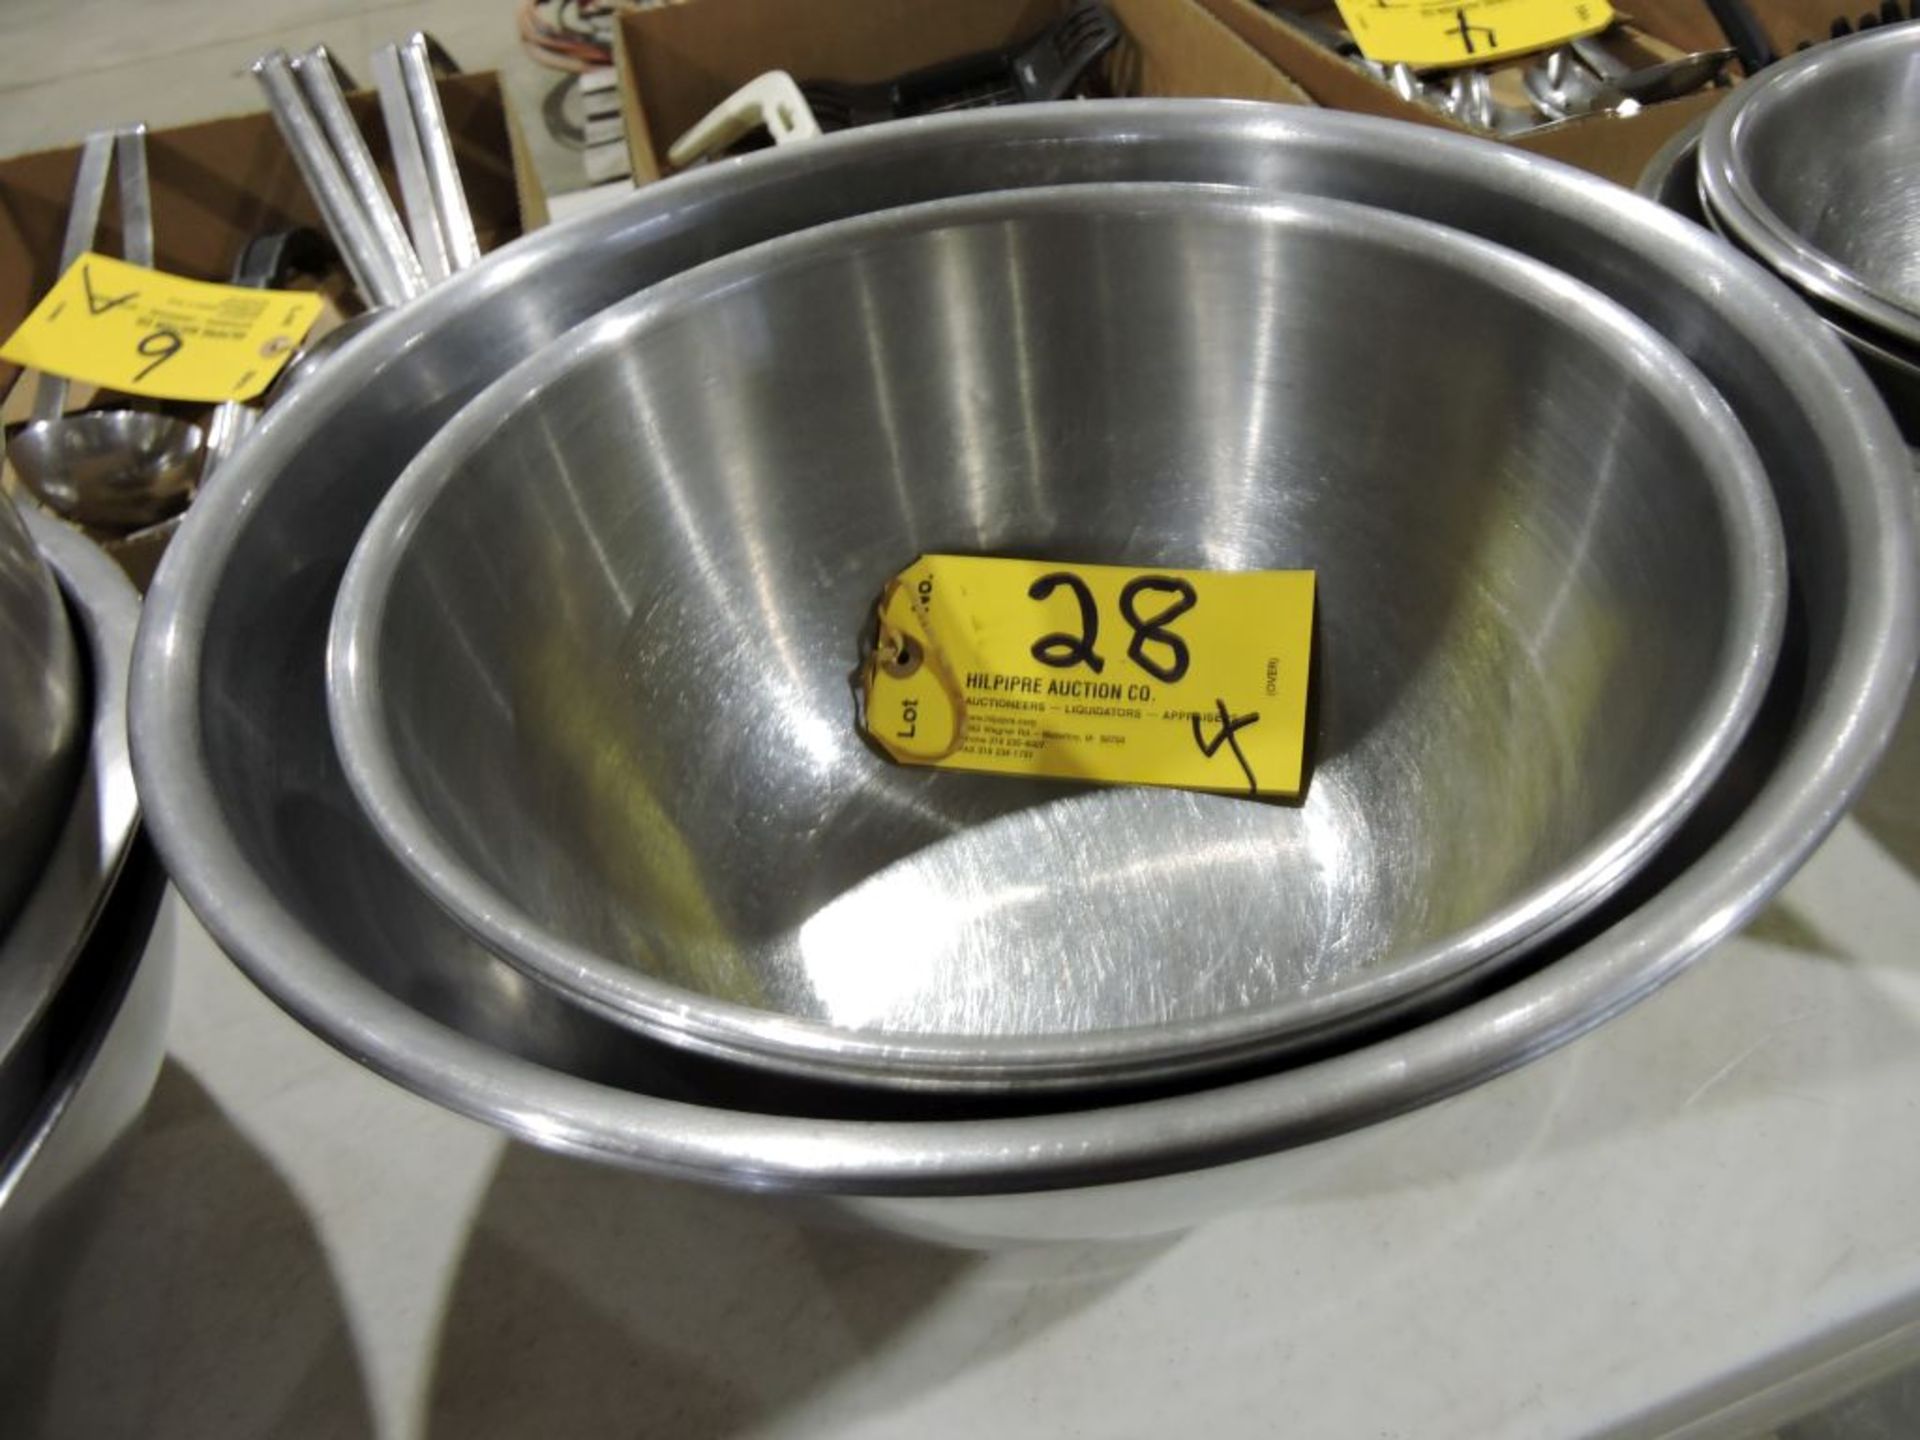 Deep stainless steel mixing bowls.